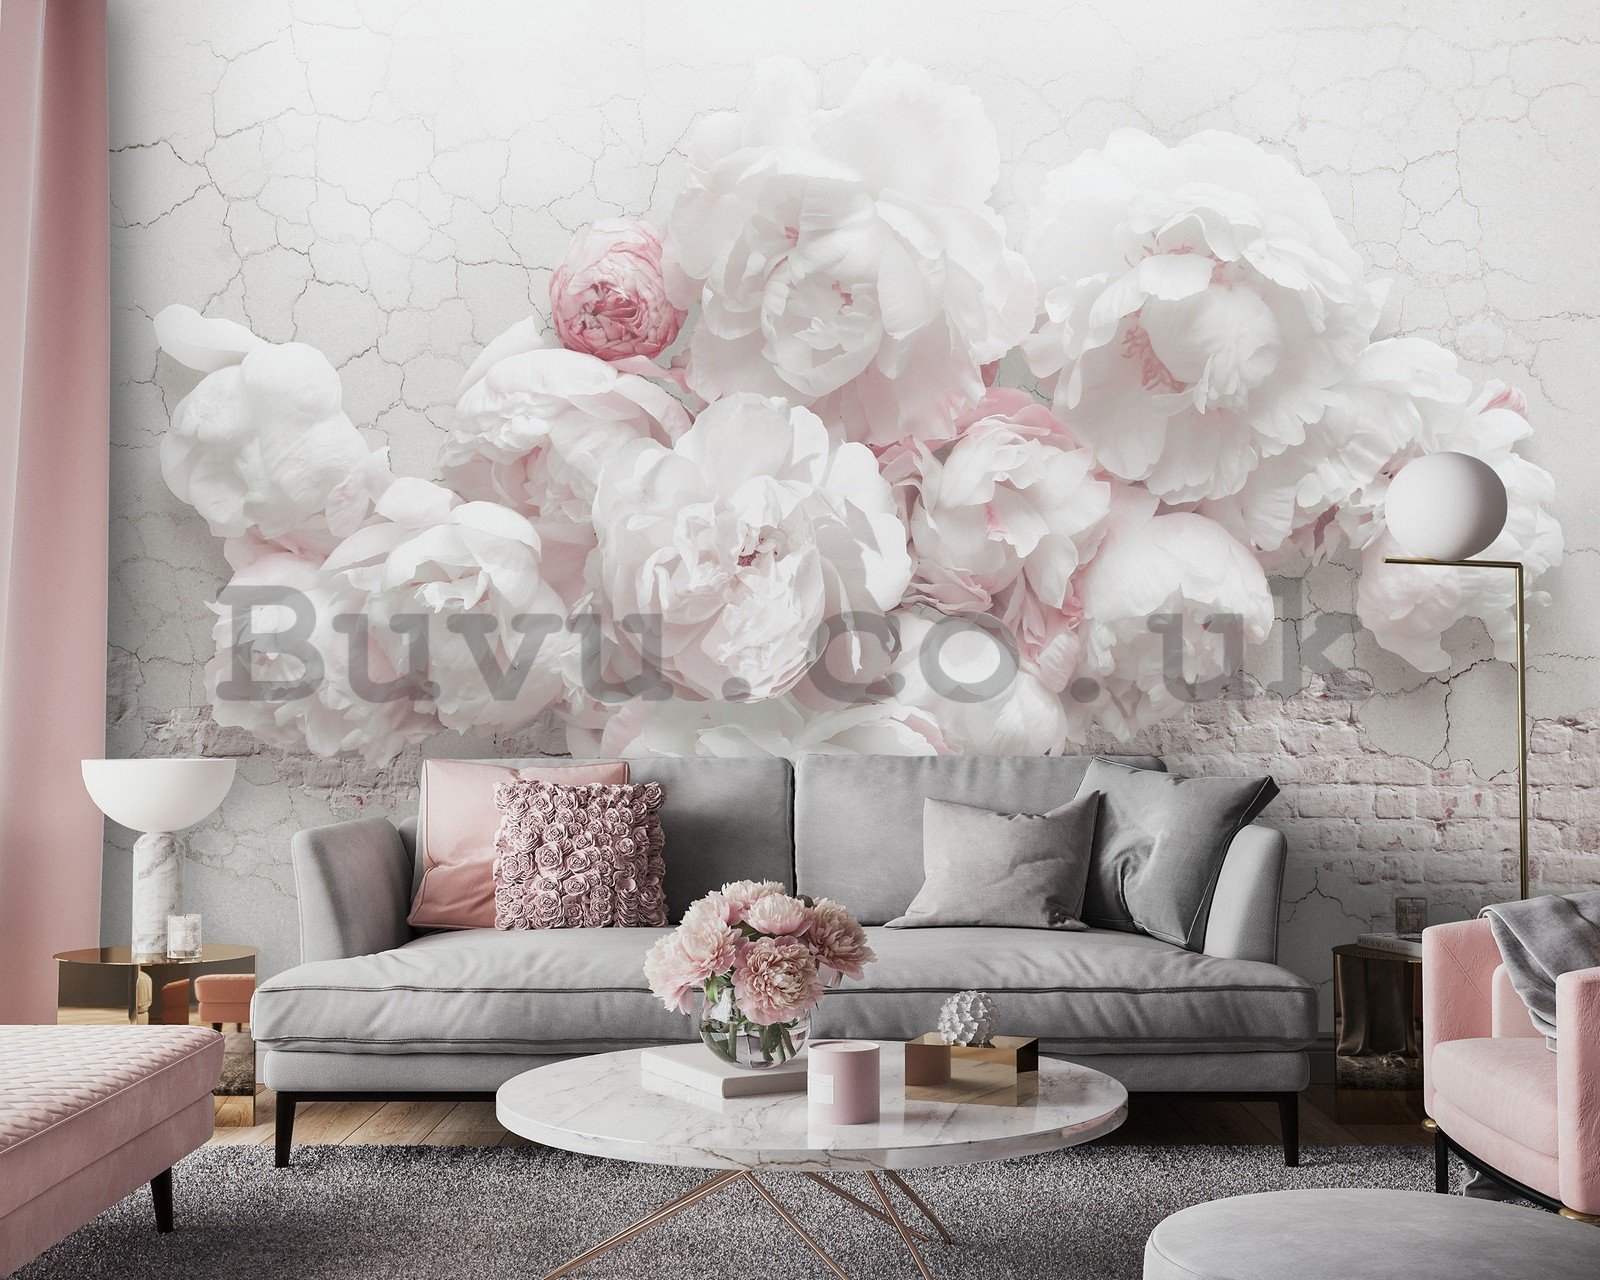 Wall mural vlies: White roses on the wall - 254x184 cm